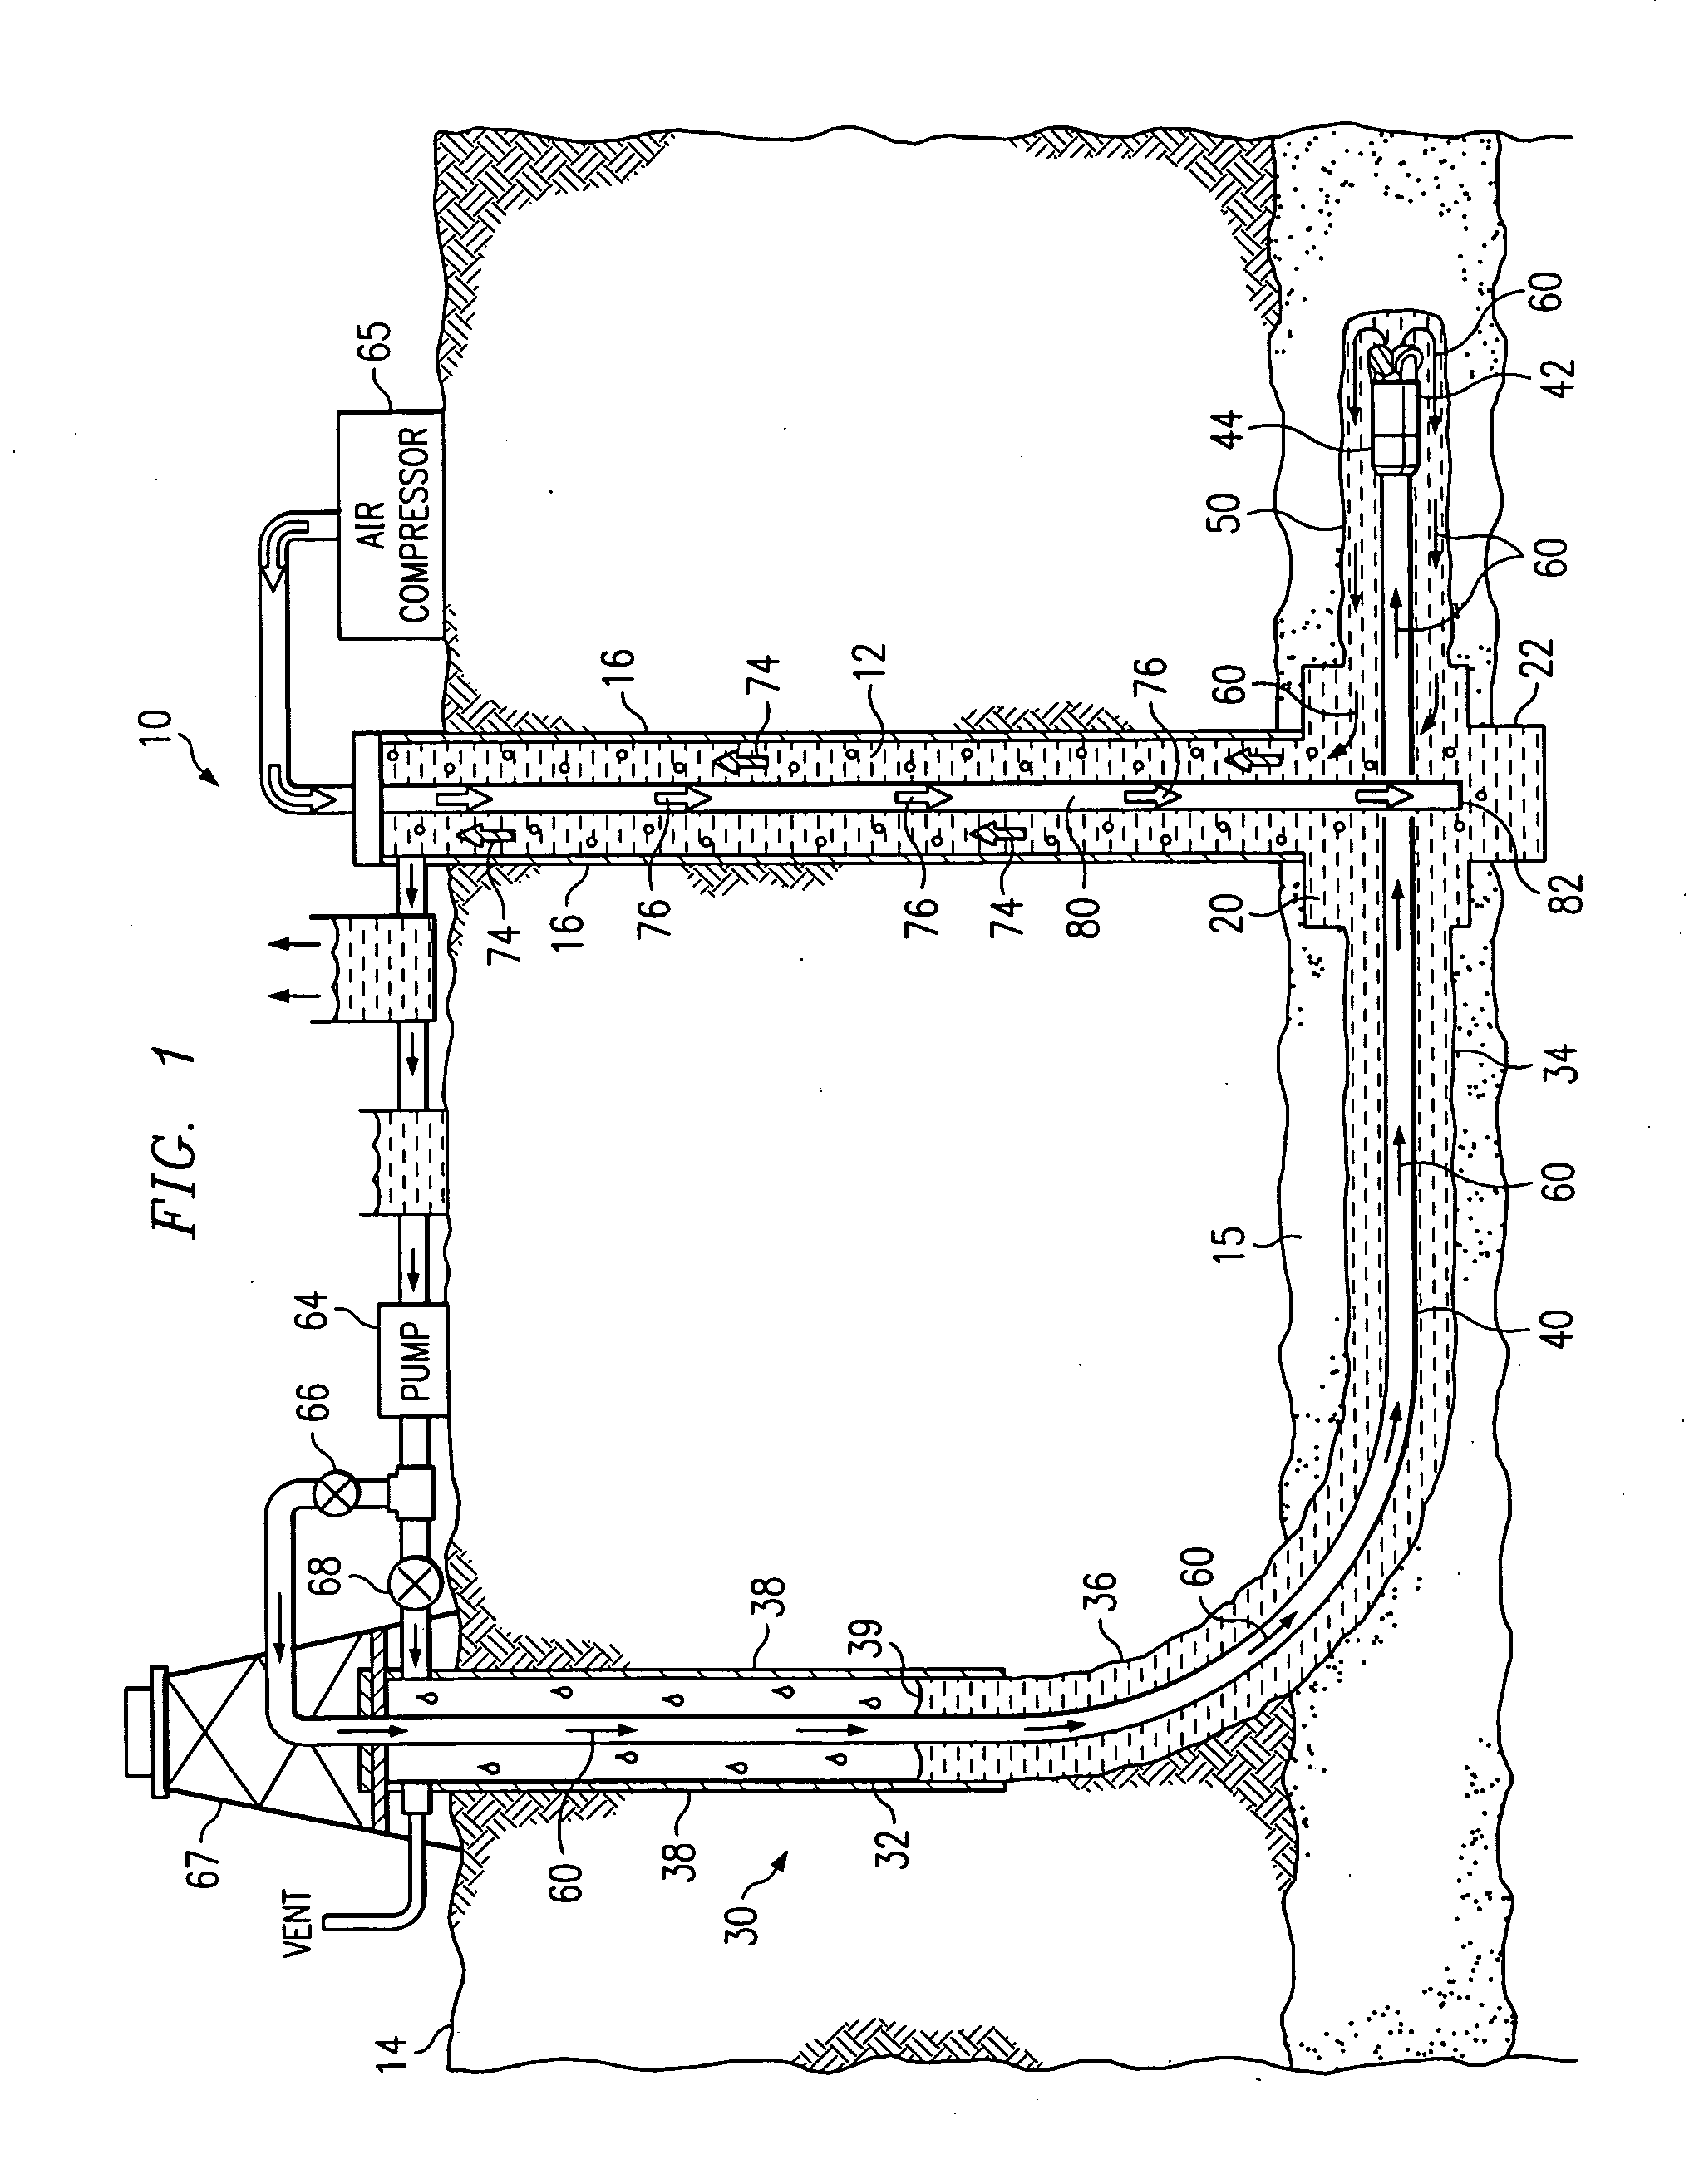 Method and system for circulating fluid in a well system